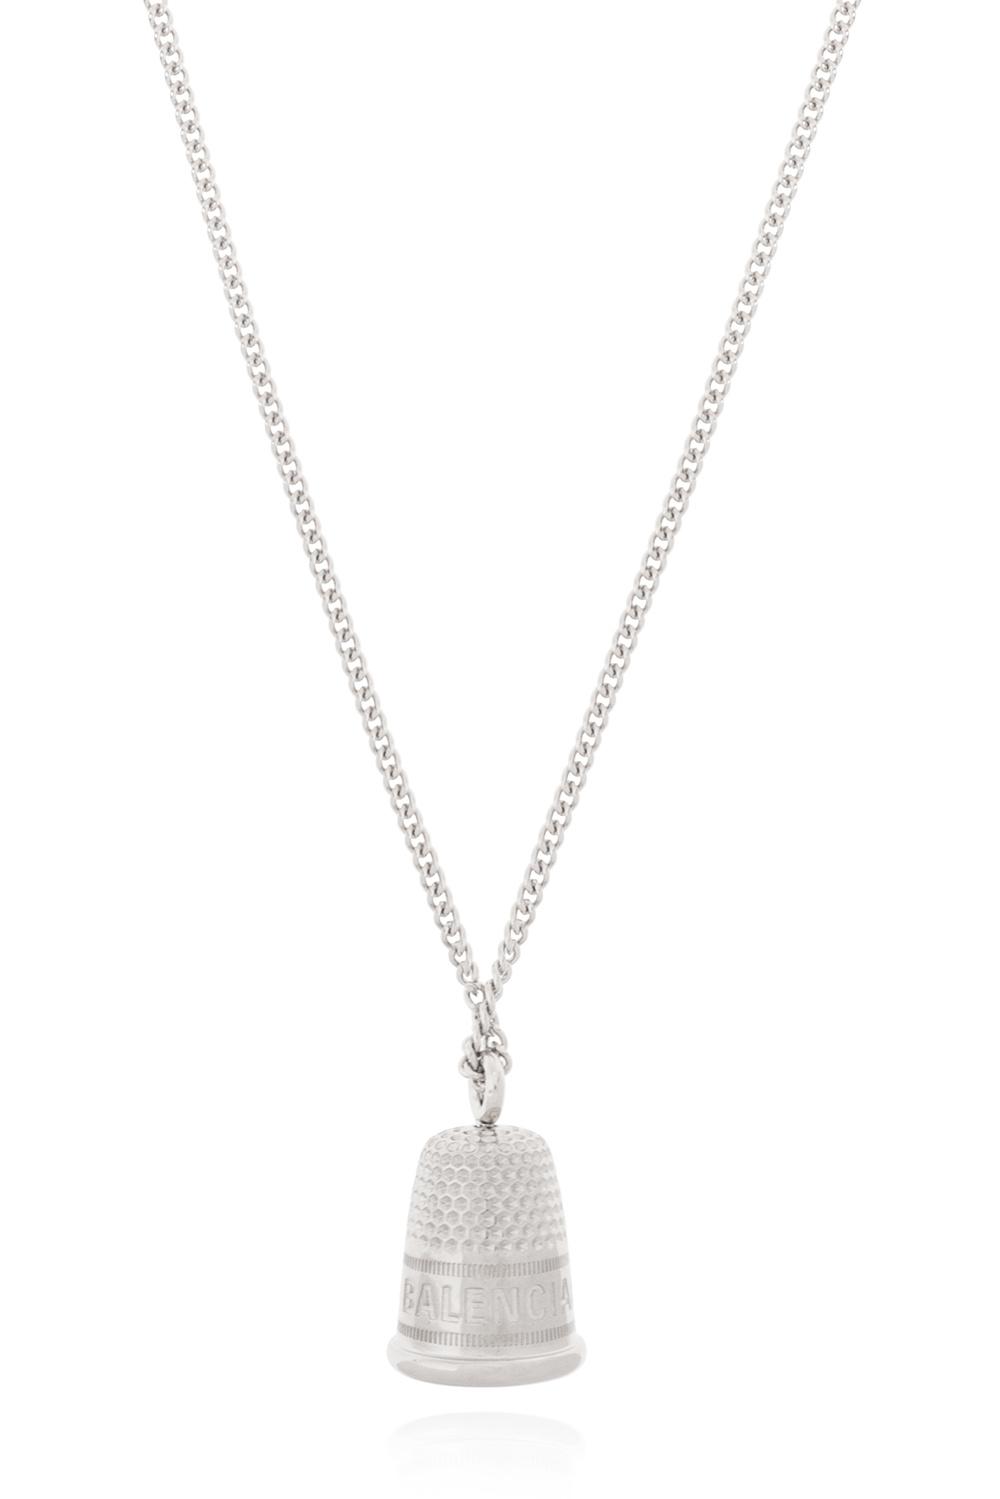 Balenciaga Necklace With Thimble Charm in Silver (Metallic) | Lyst